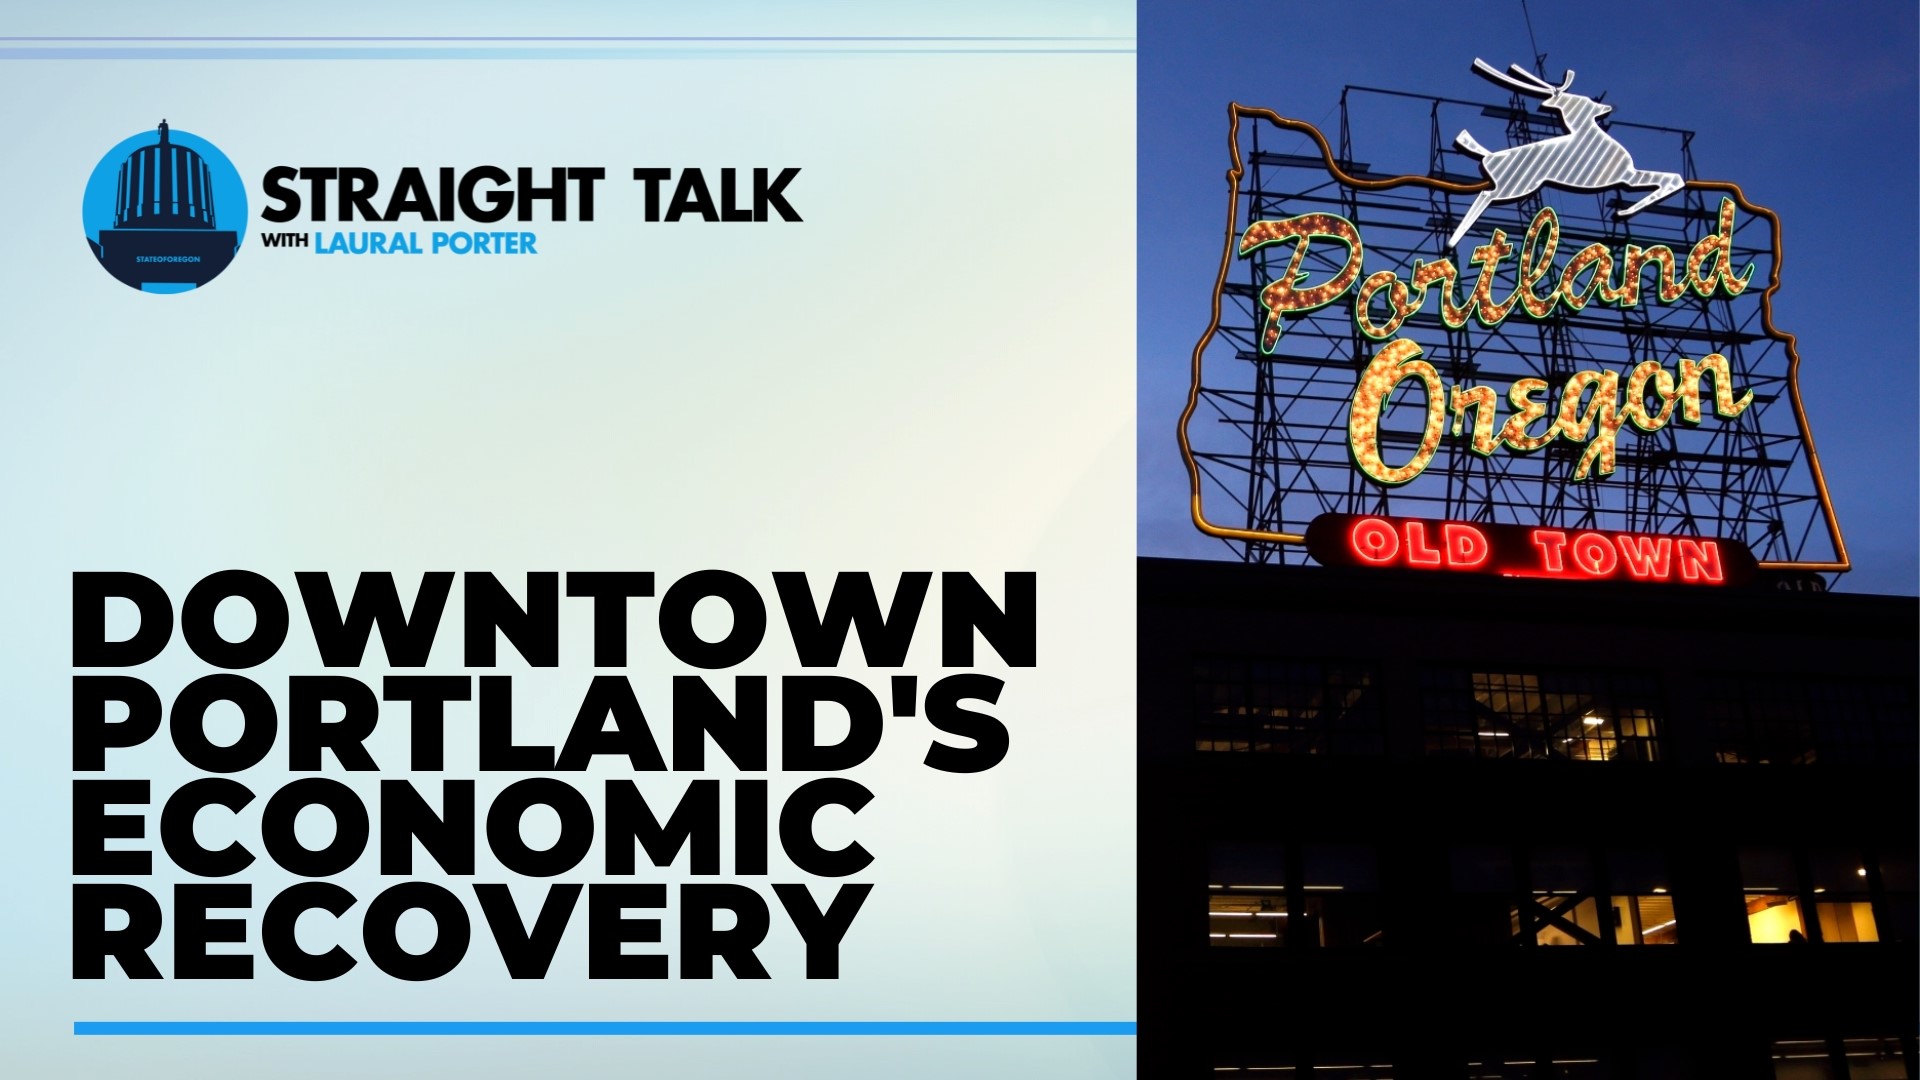 Business leaders said there are positive trends in downtown Portland's economic recovery but acknowledge it's a "work in progress" and won't happen overnight.